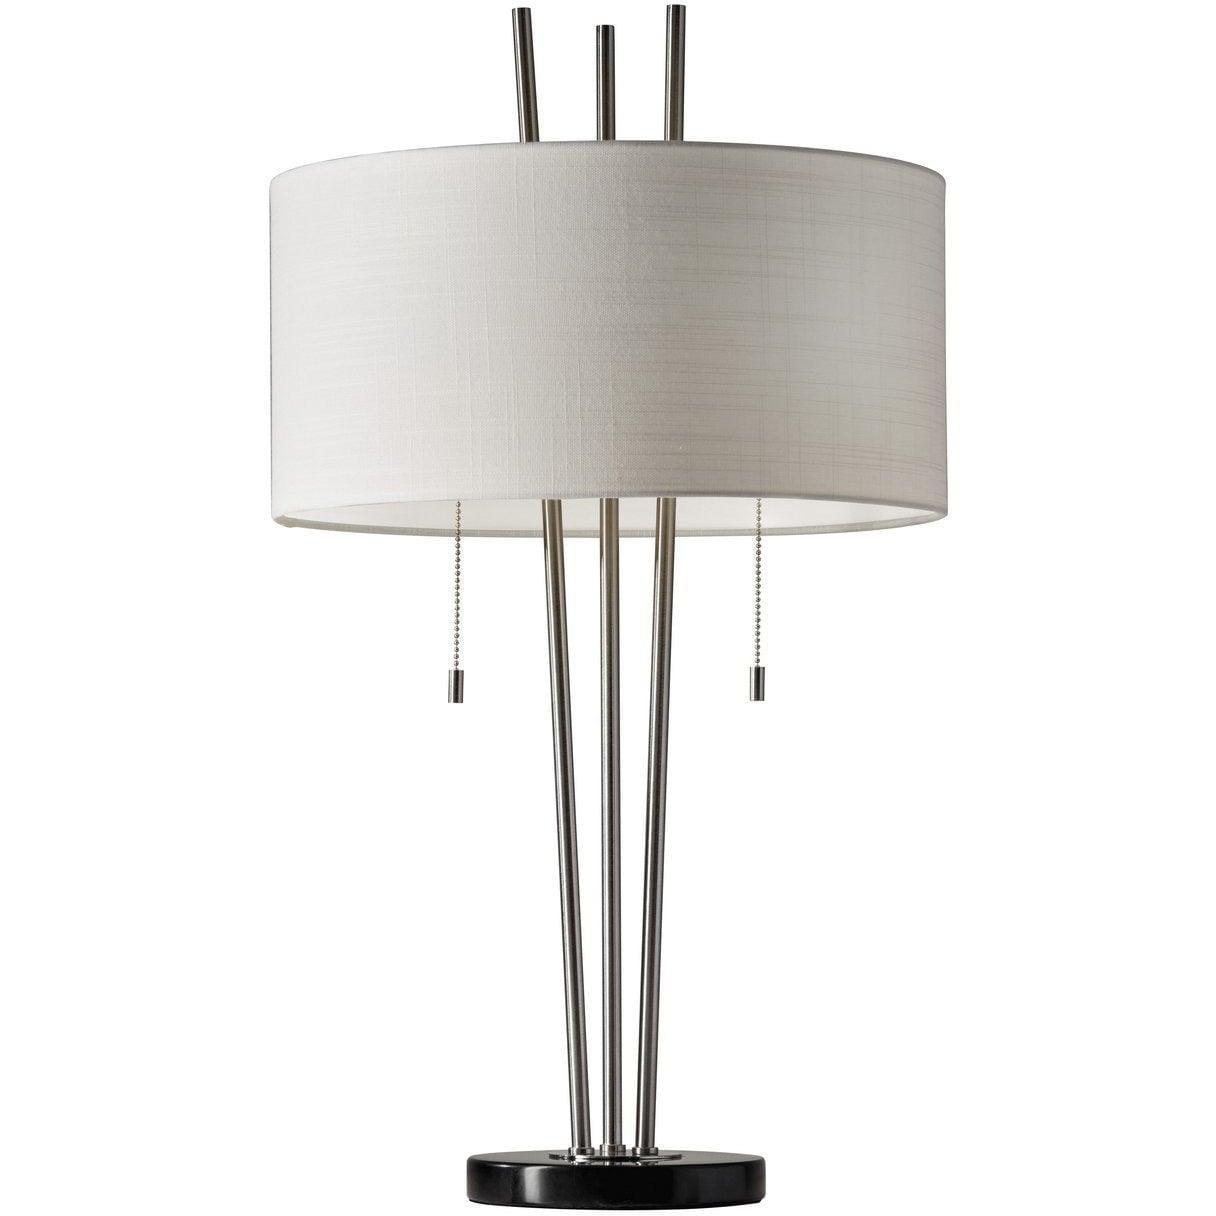 Adesso Home - Anderson Table Lamp - 4072-22 | Montreal Lighting & Hardware